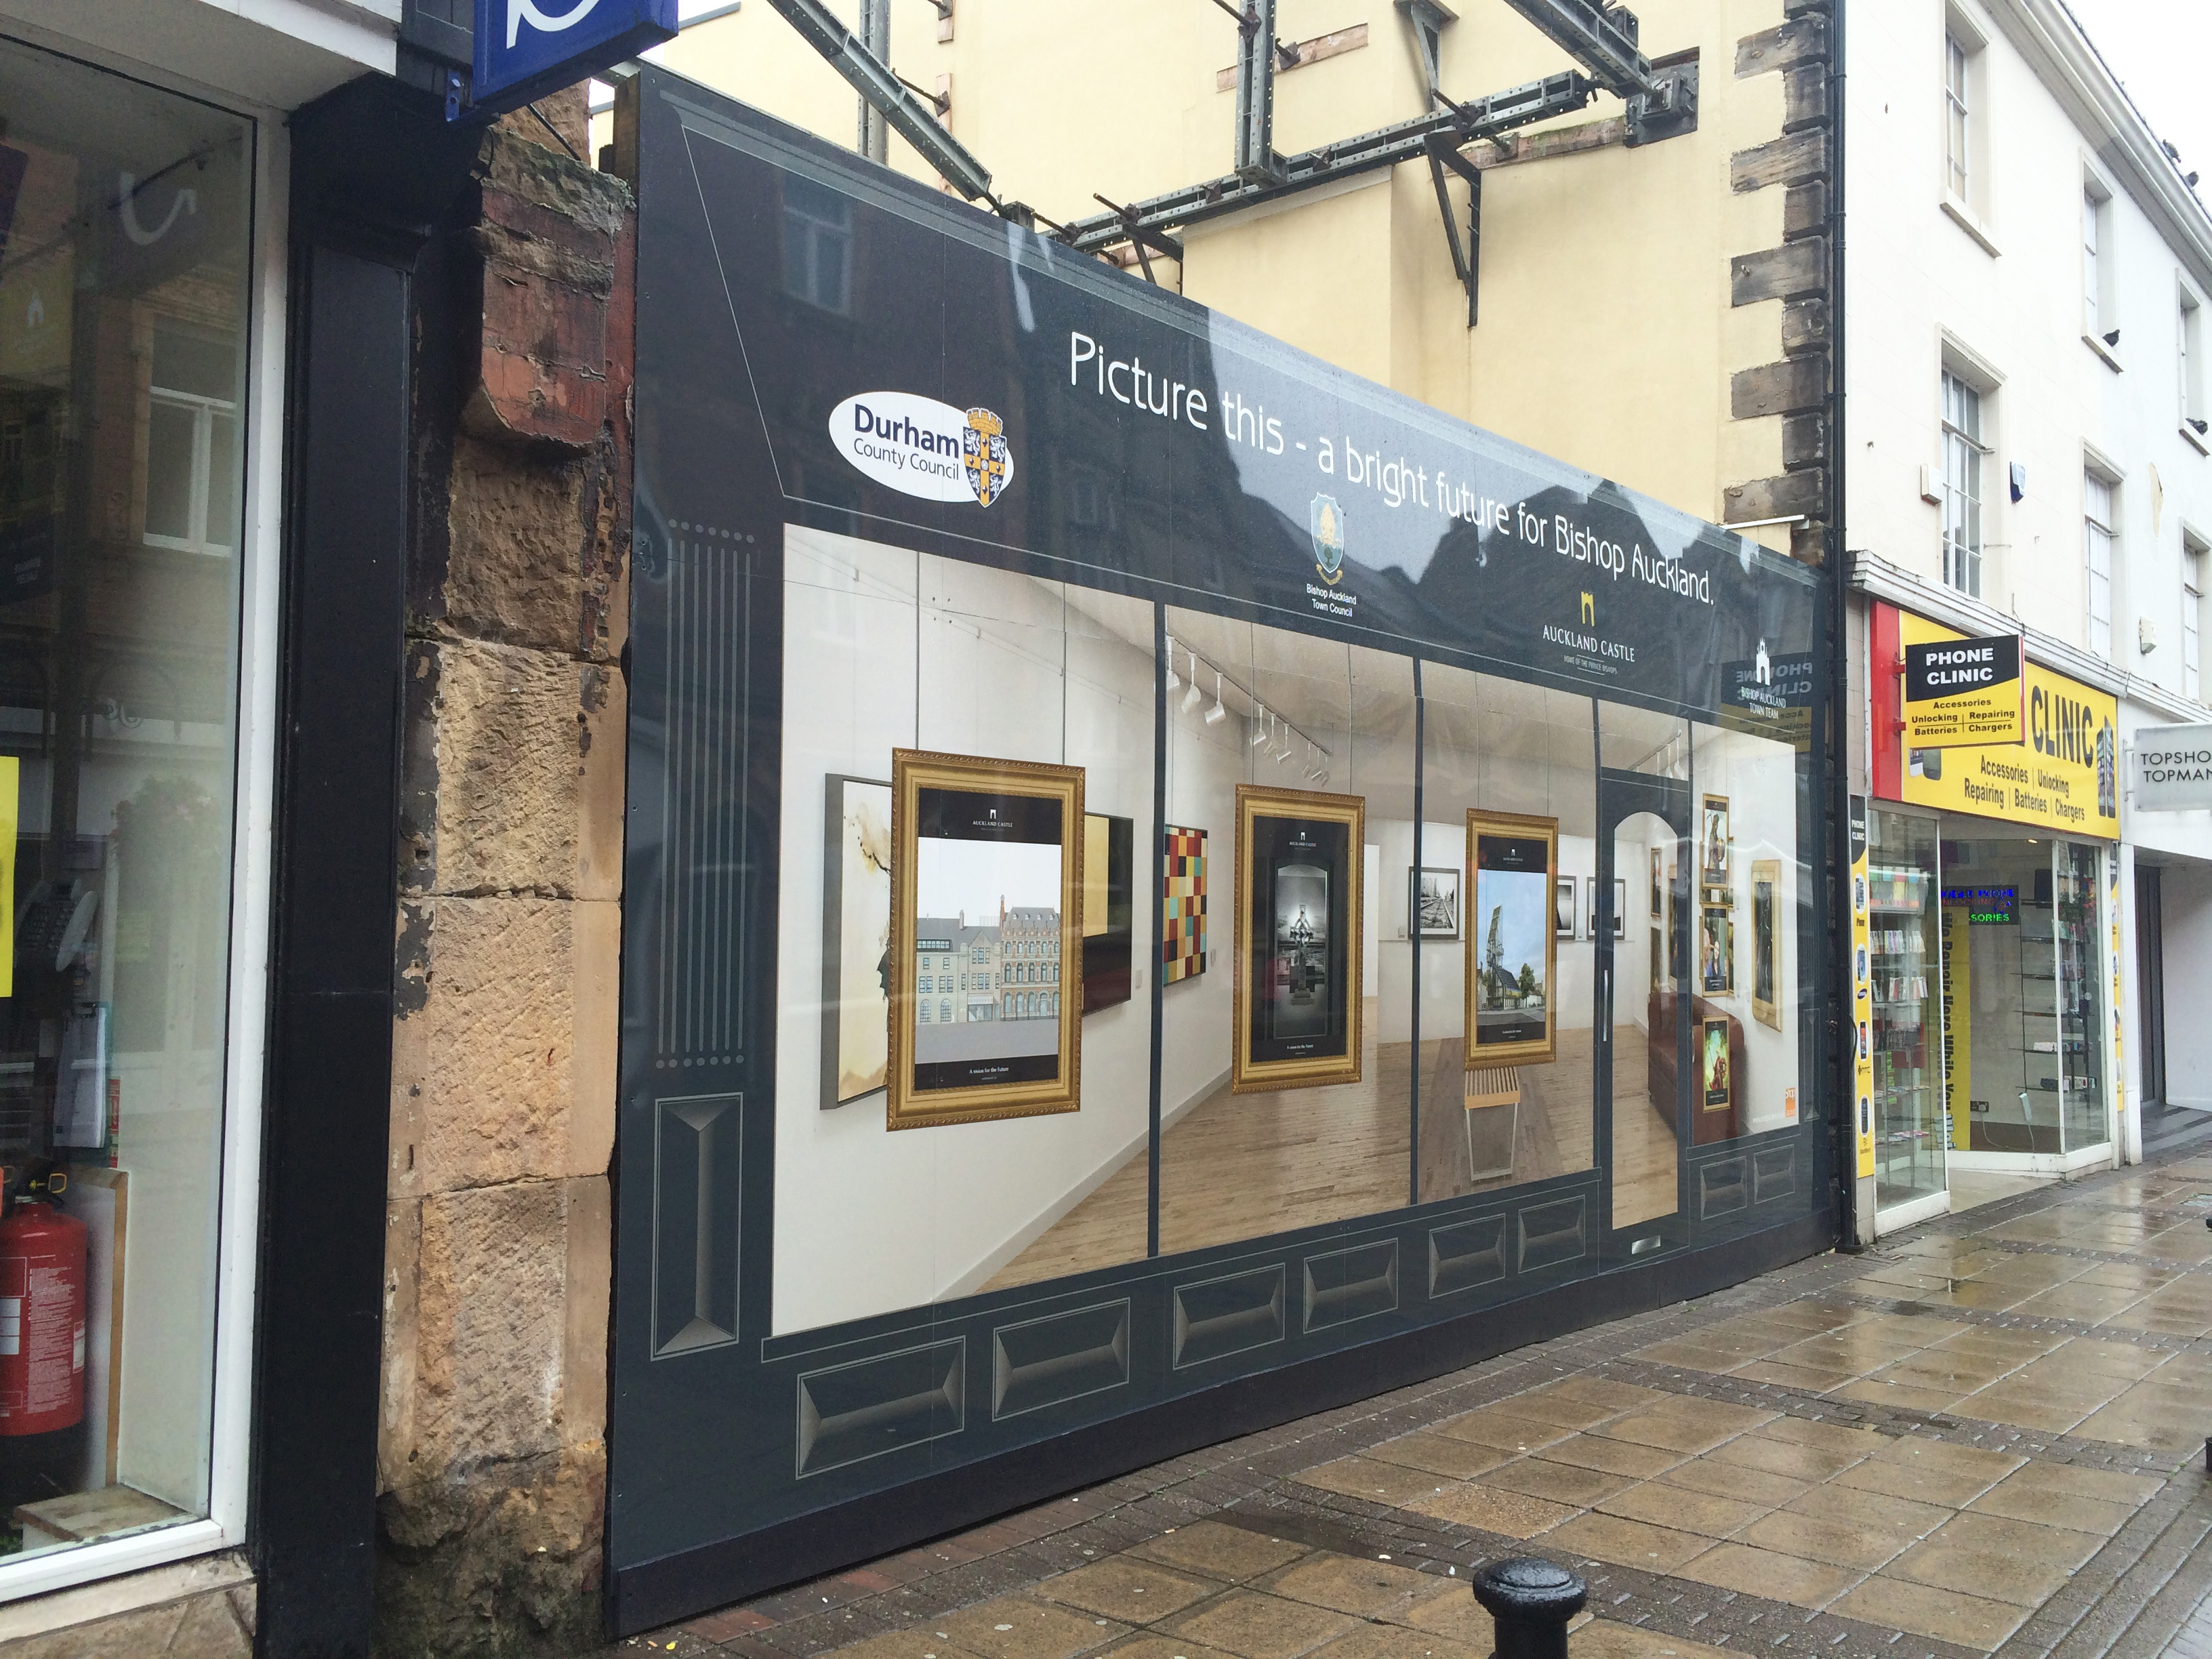 Shop Wraps Show Possibilities For Bishop Auckland